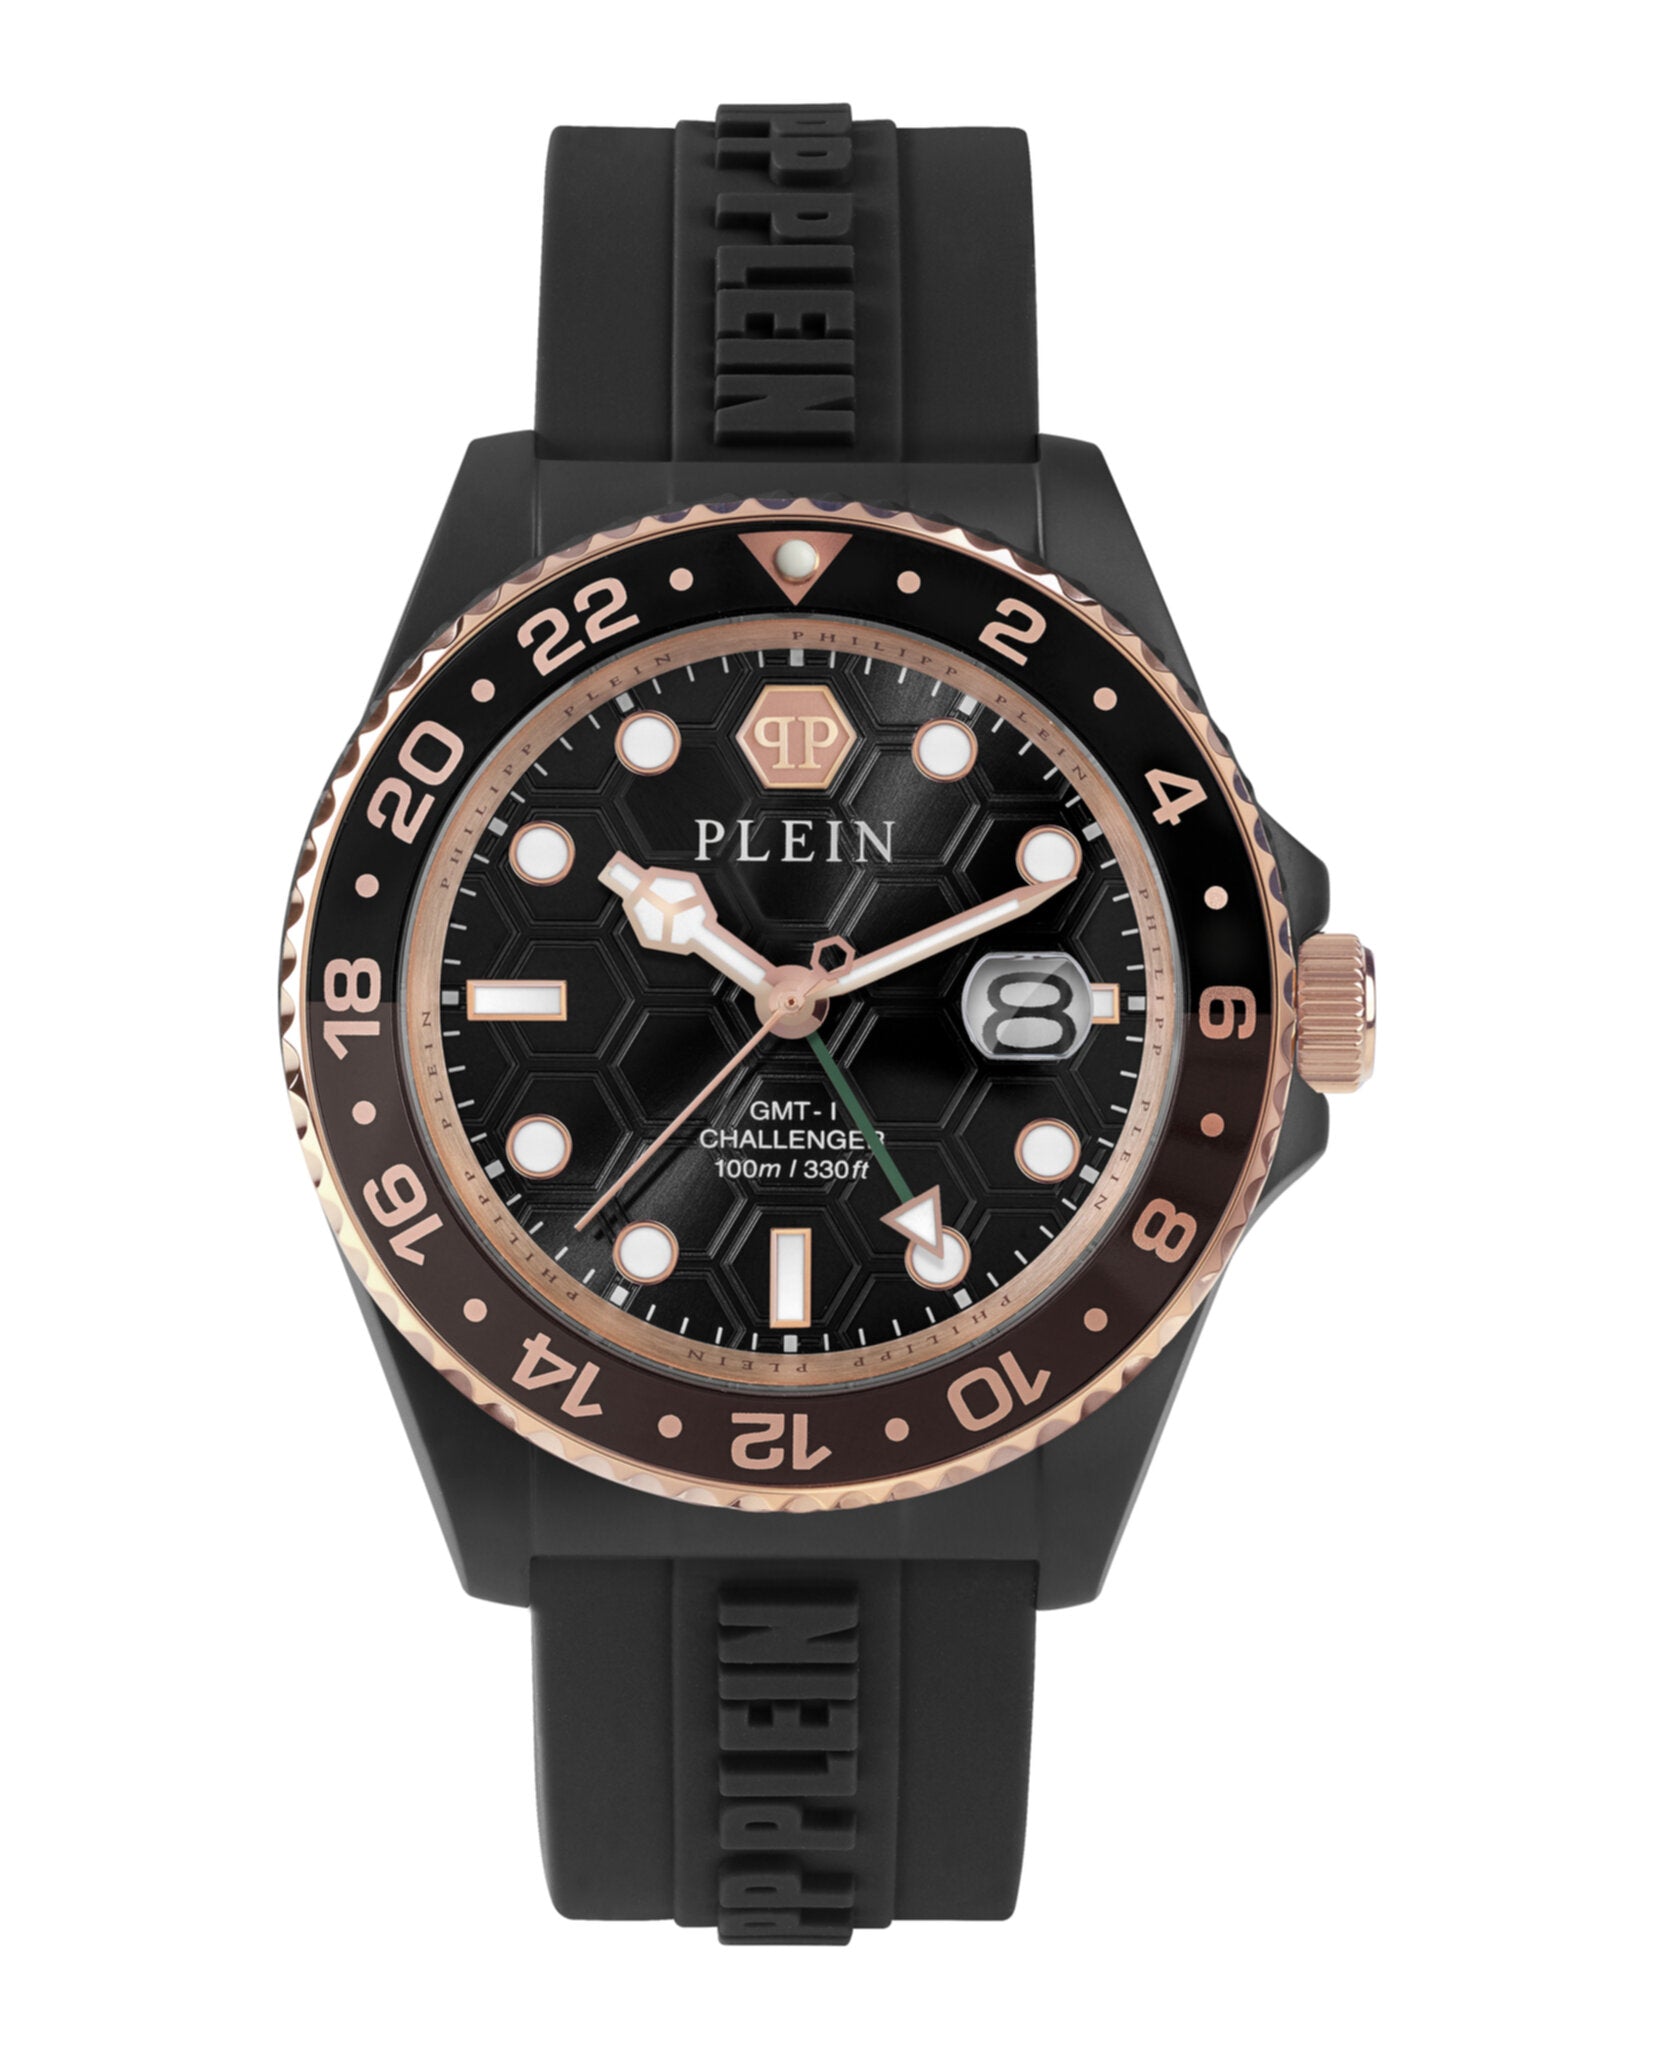 GMT-I Challenger Silicone Watch